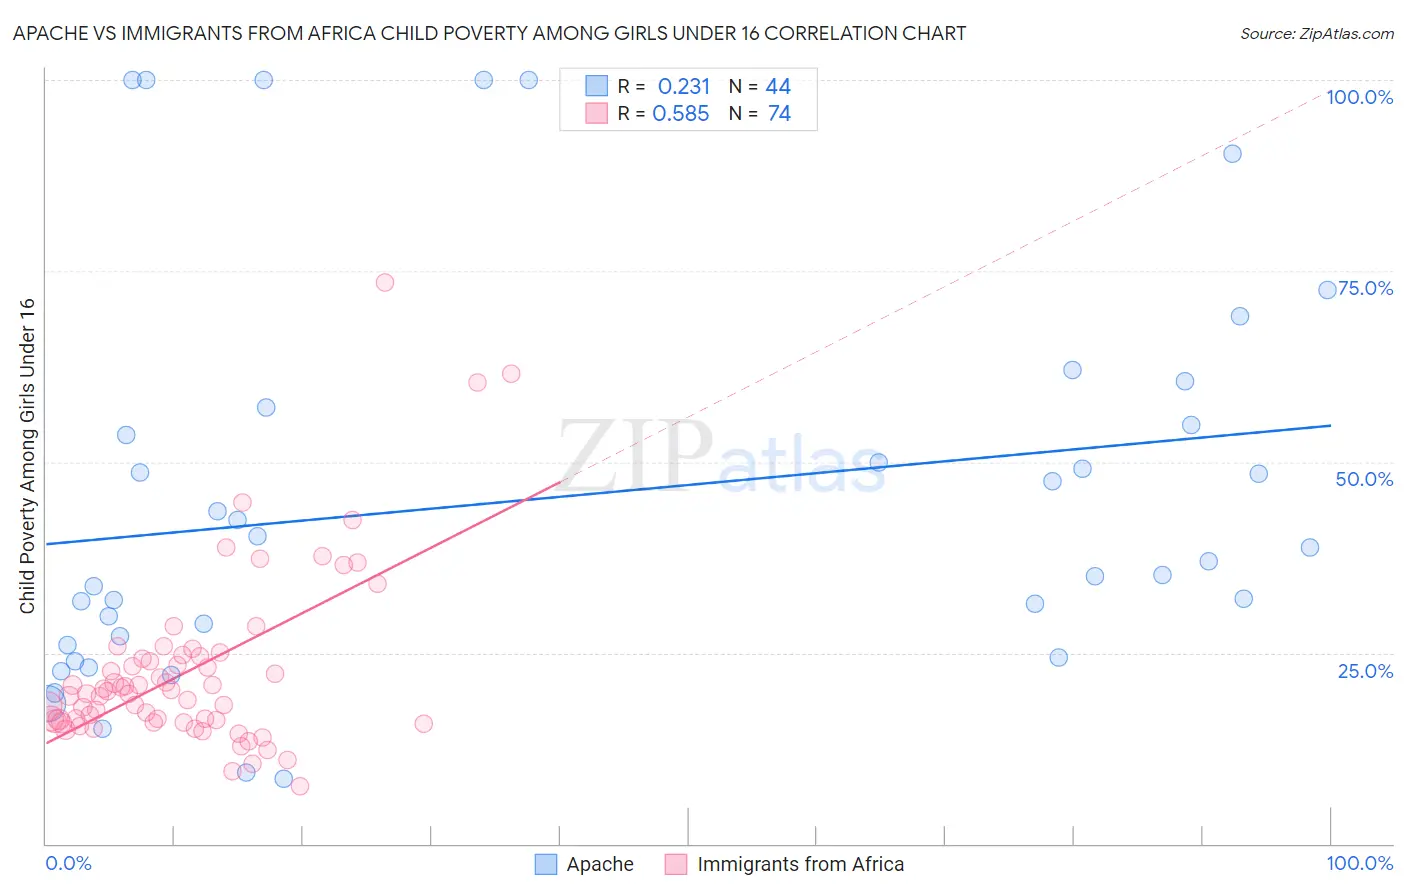 Apache vs Immigrants from Africa Child Poverty Among Girls Under 16